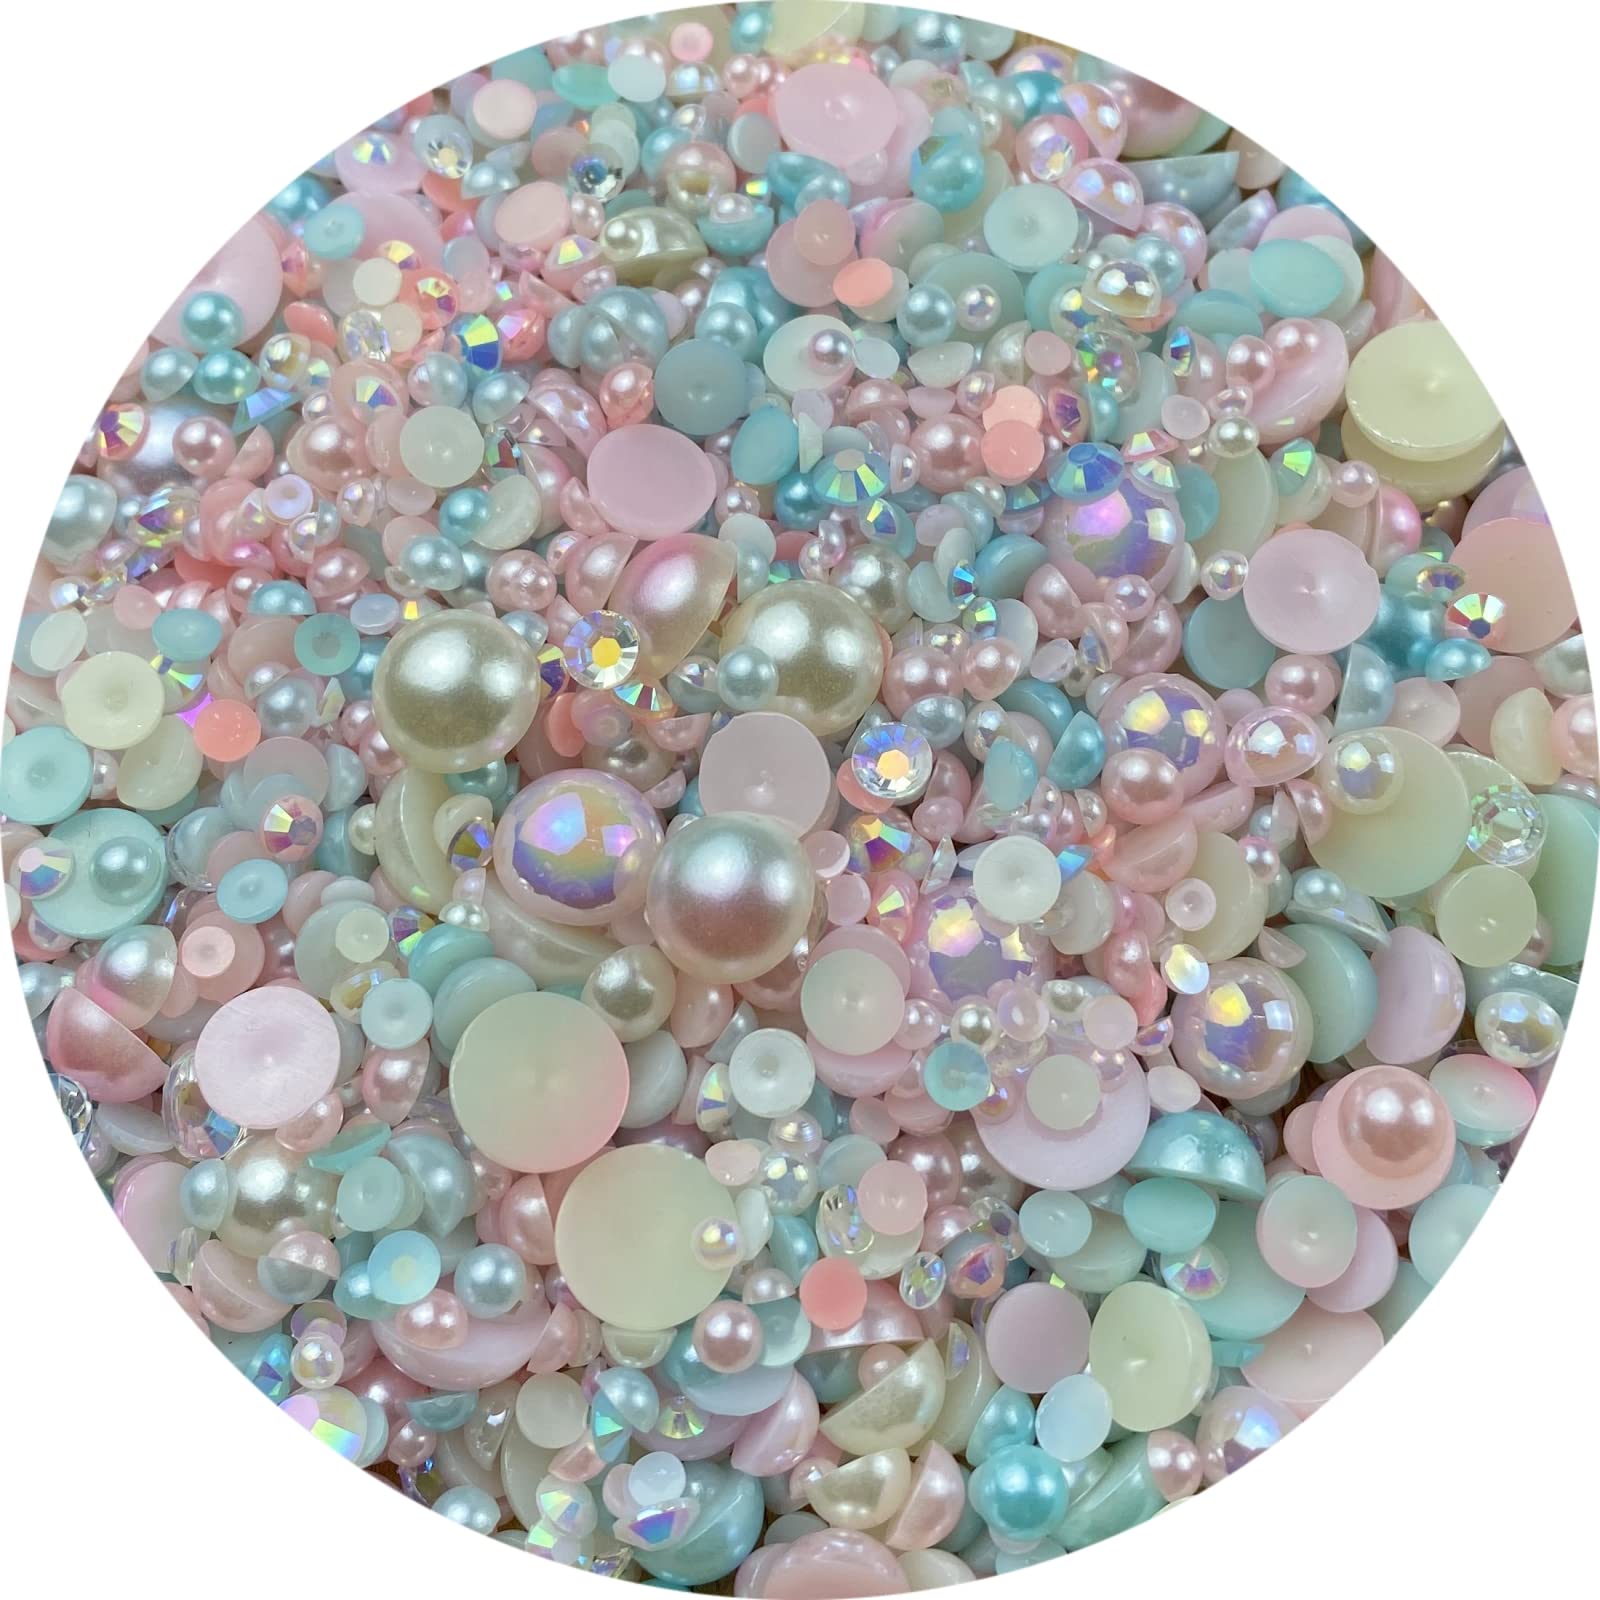 Assorted Half Pearl in AB Pastel Colors, ABS Pearl Wheel, Faux Pearl, MiniatureSweet, Kawaii Resin Crafts, Decoden Cabochons Supplies